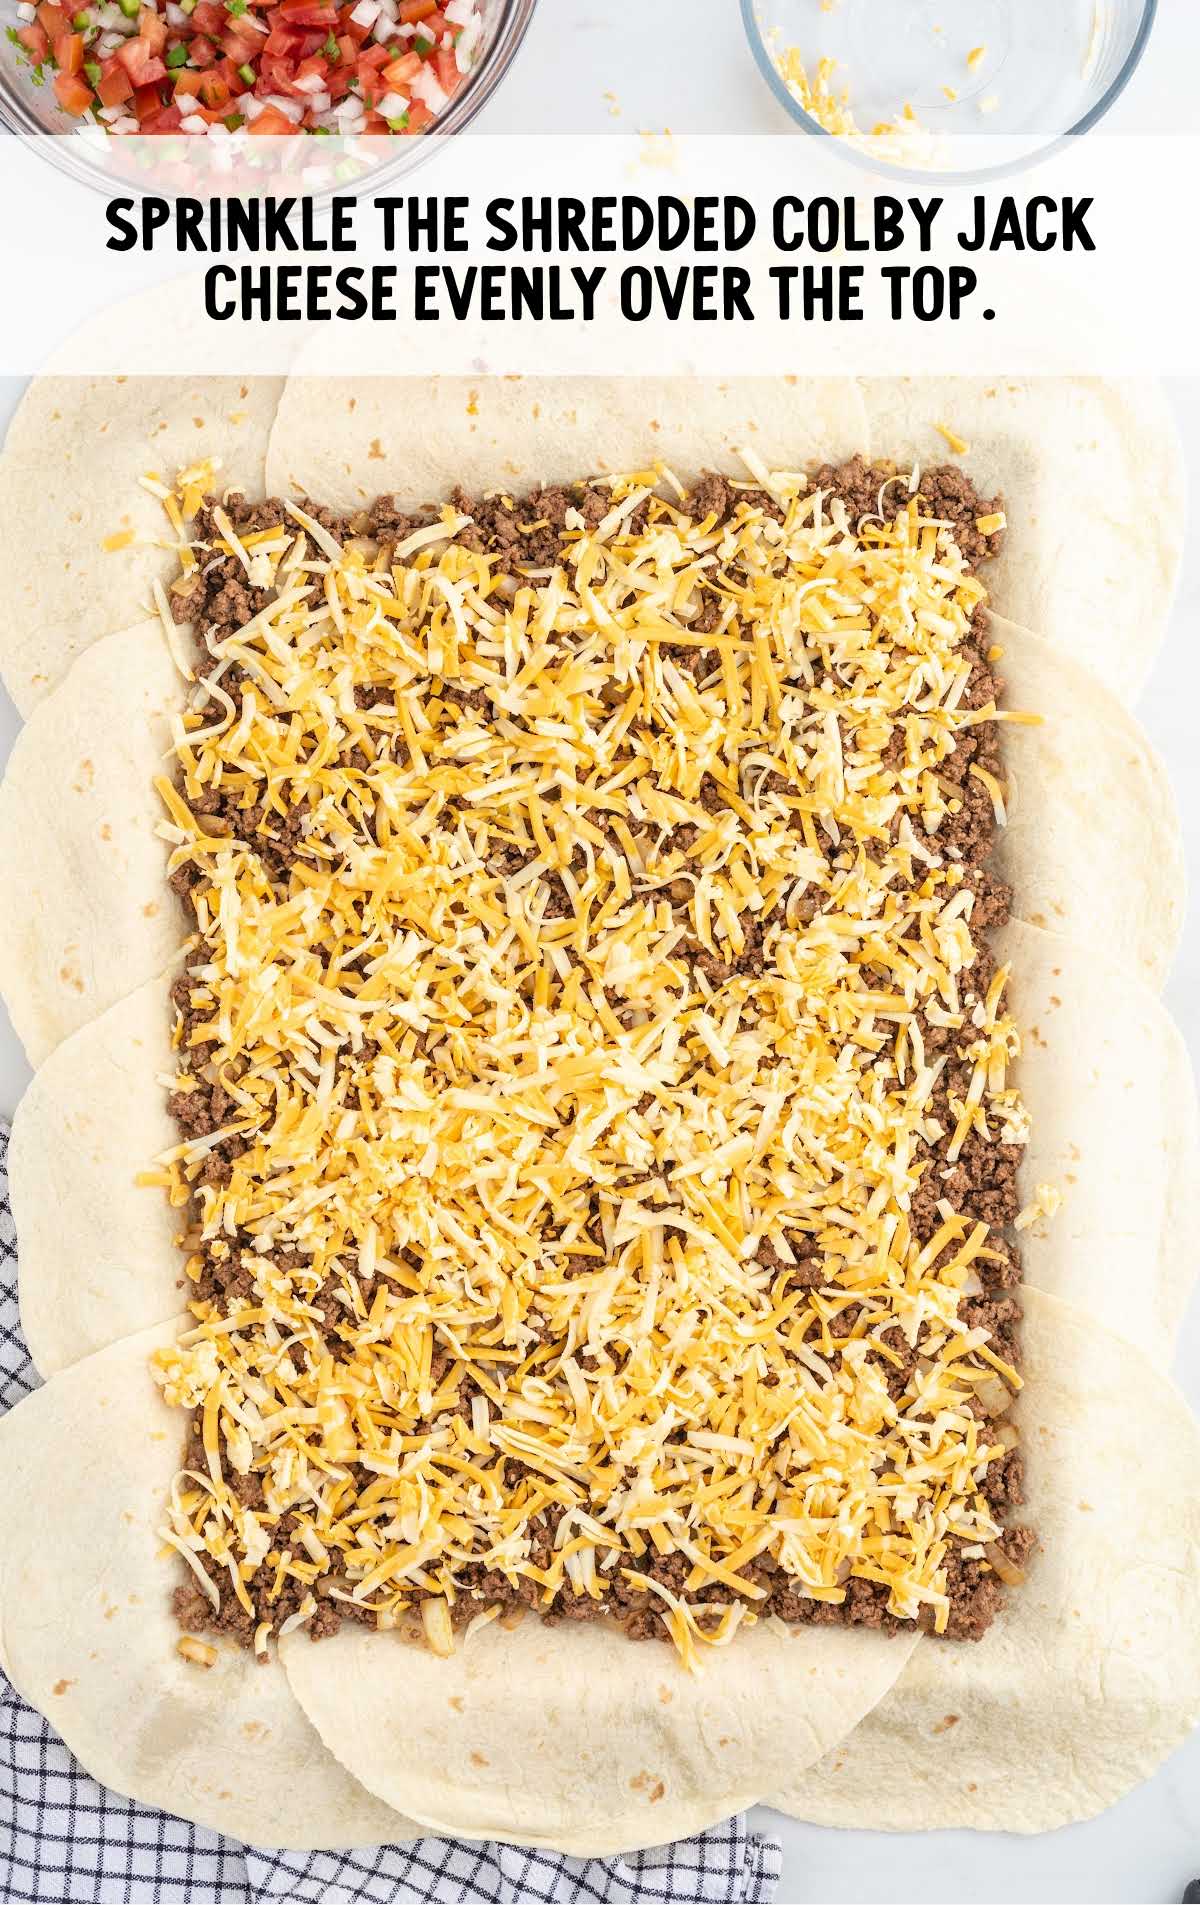 Colby jack cheese sprinkled on top of the ground beef mixture